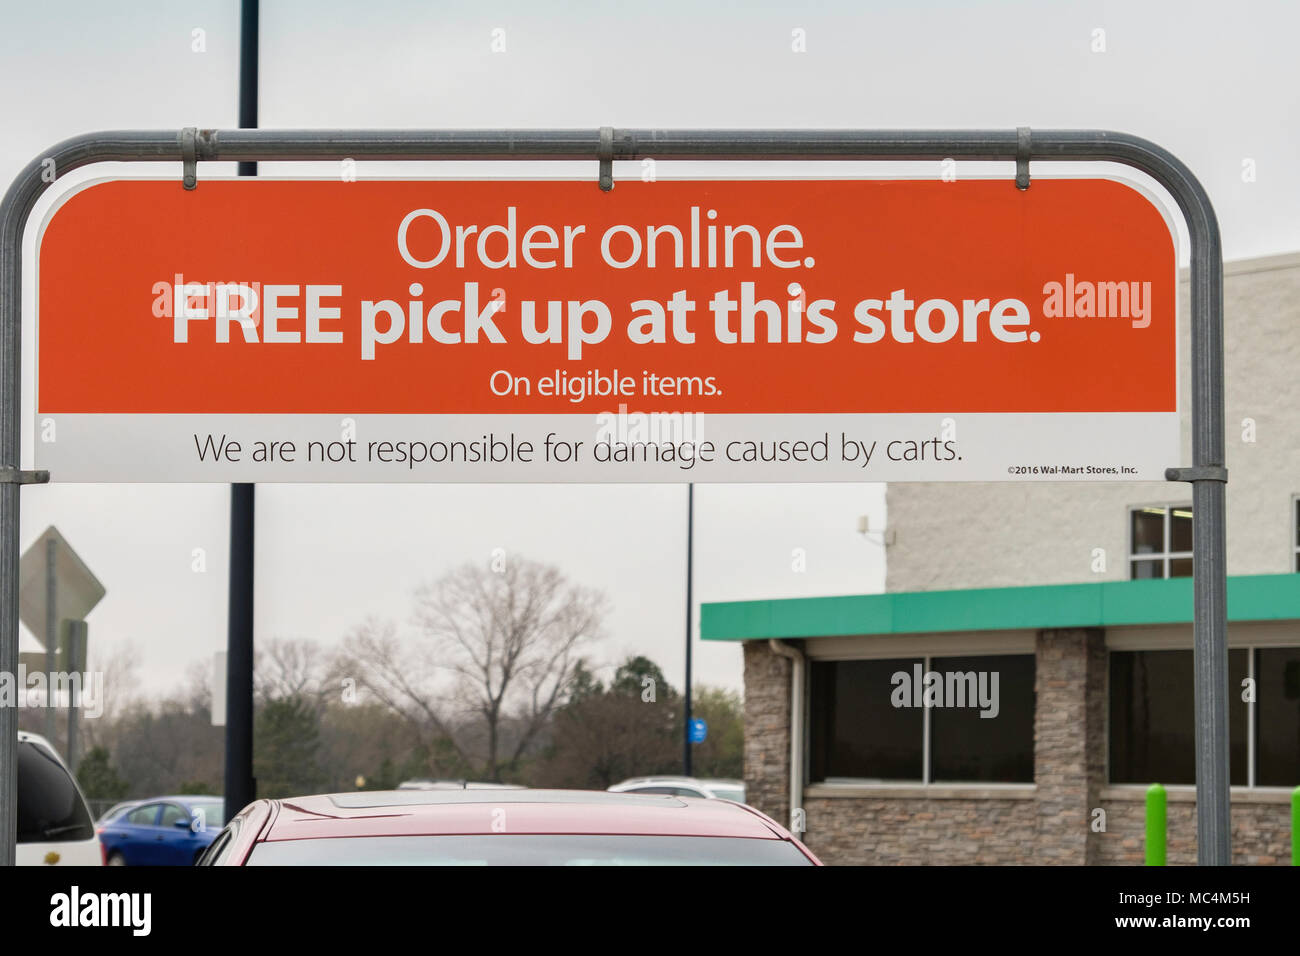 A sign above a shopping cart caddy in a Walmart parking lot advertising Ordering online, picking up at store. Wichita, Kansas,USA. Stock Photo